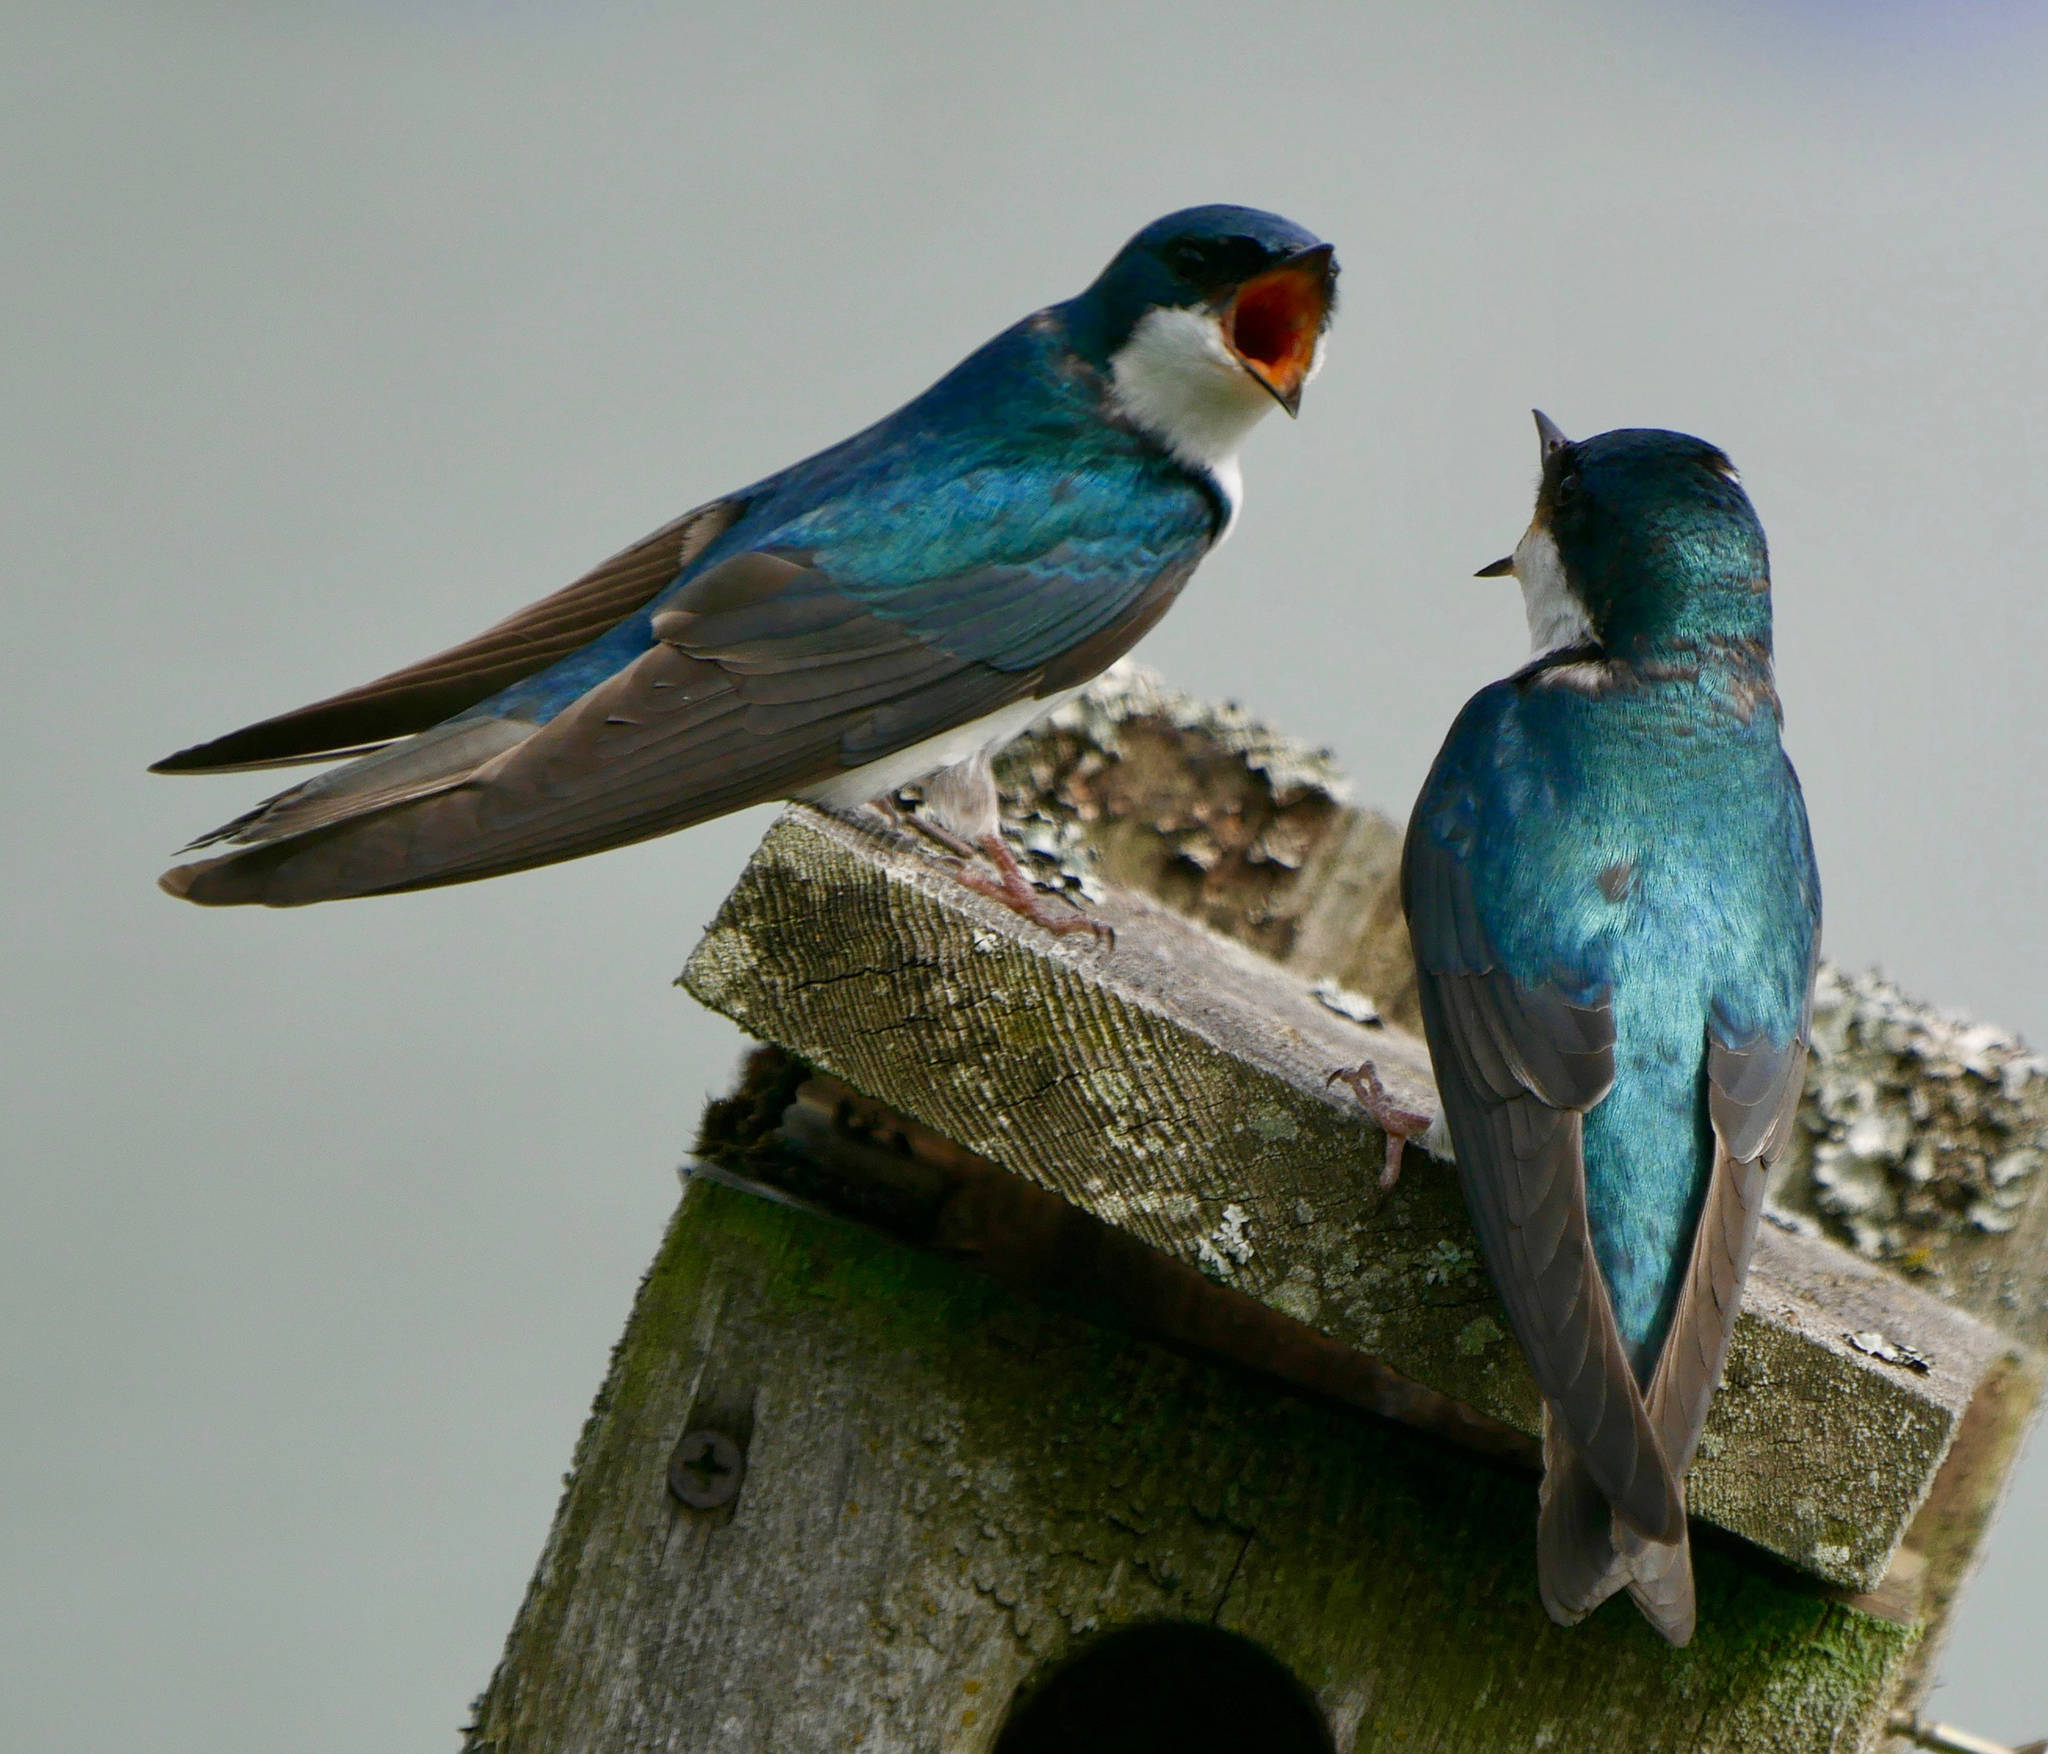 A pair of talkative swallows chat in the Mendenhall Wetlands State Game Refuge on June 13, 2019. (Courtesy Photo | Janine Reep)